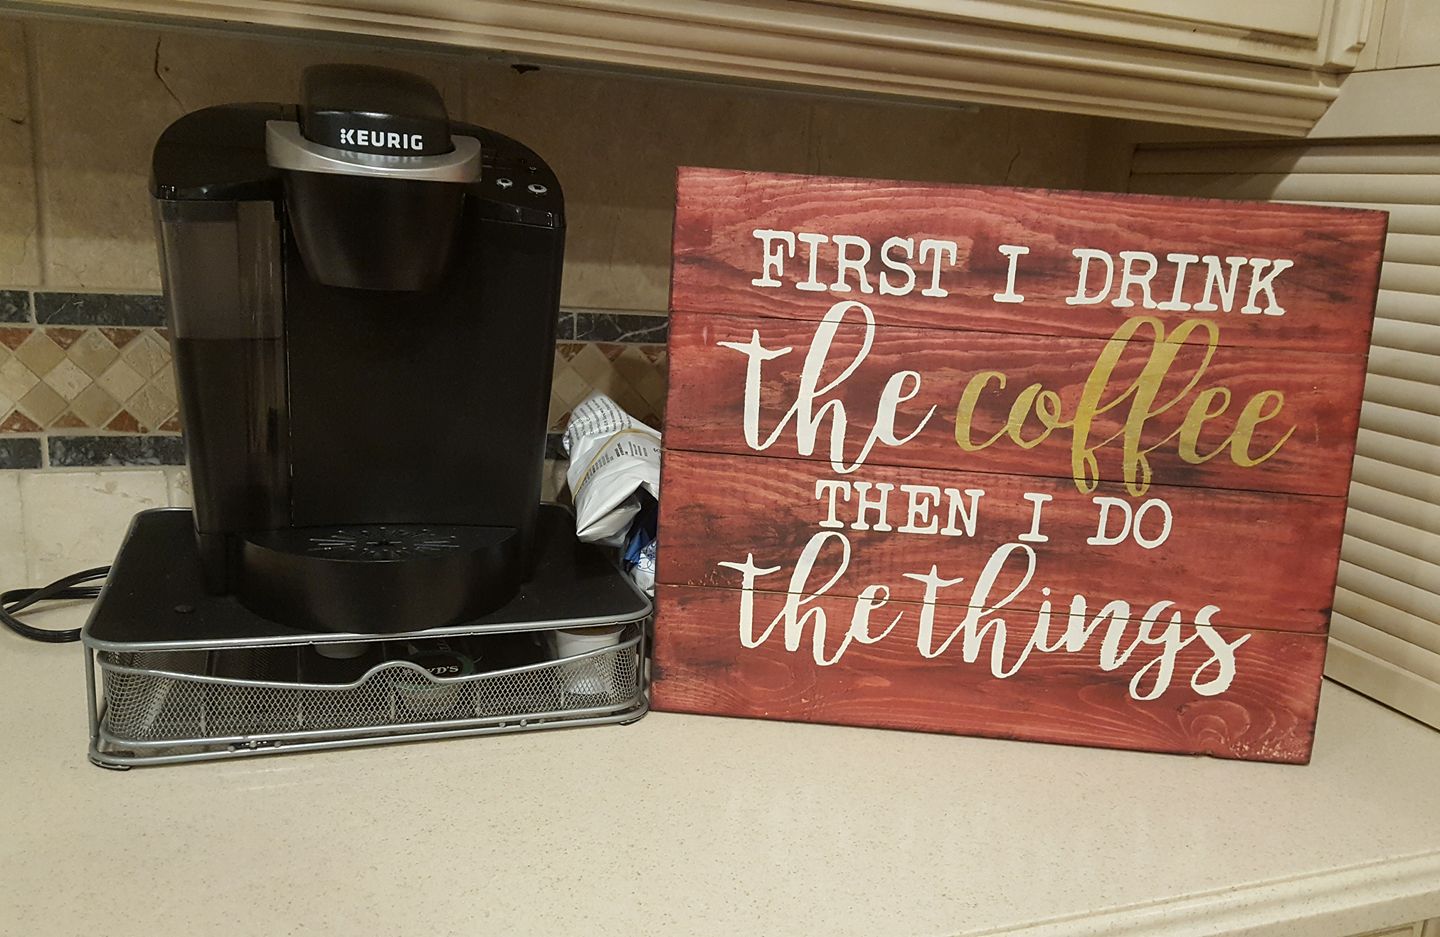 First I drink the coffee and then I do the things